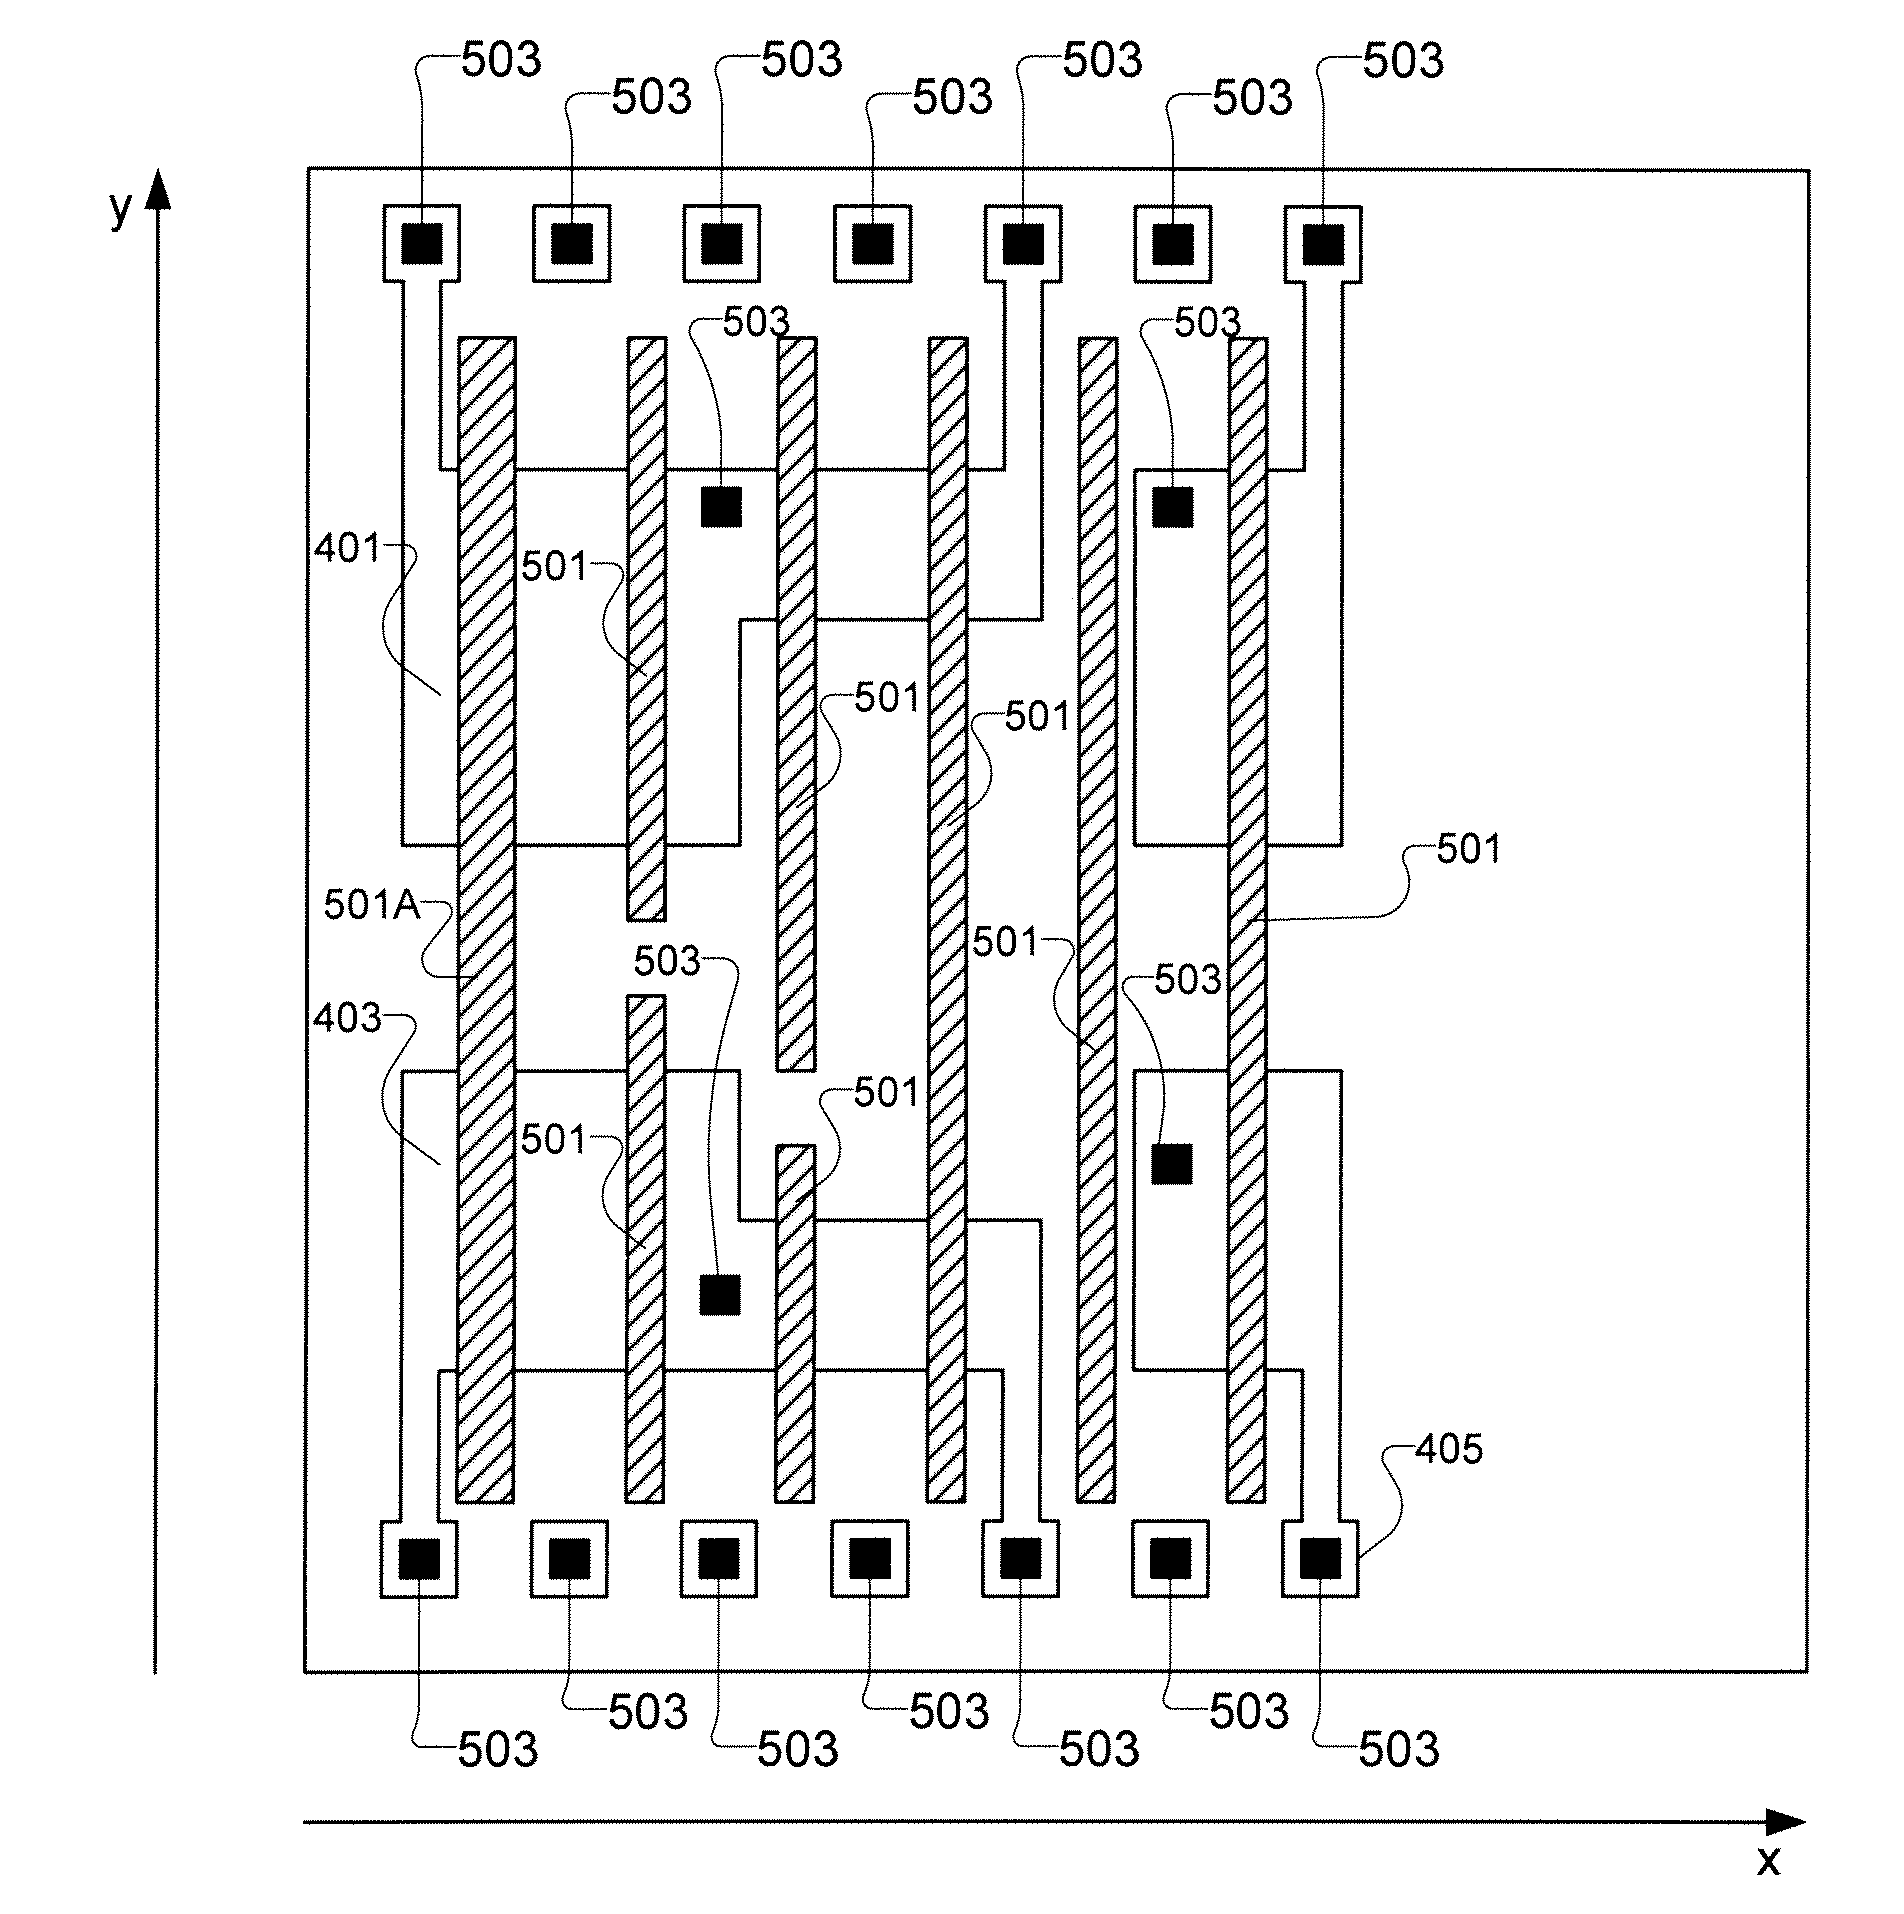 Semiconductor Device Portion Having Gate Electrode Conductive Structures Formed from Linear Shaped Gate Electrode Layout Features Defined Along At Least Four Gate Electrode Tracks with Minimum End-to-End Spacing and Having Corresponding Non-Symmetric Diffusion Regions